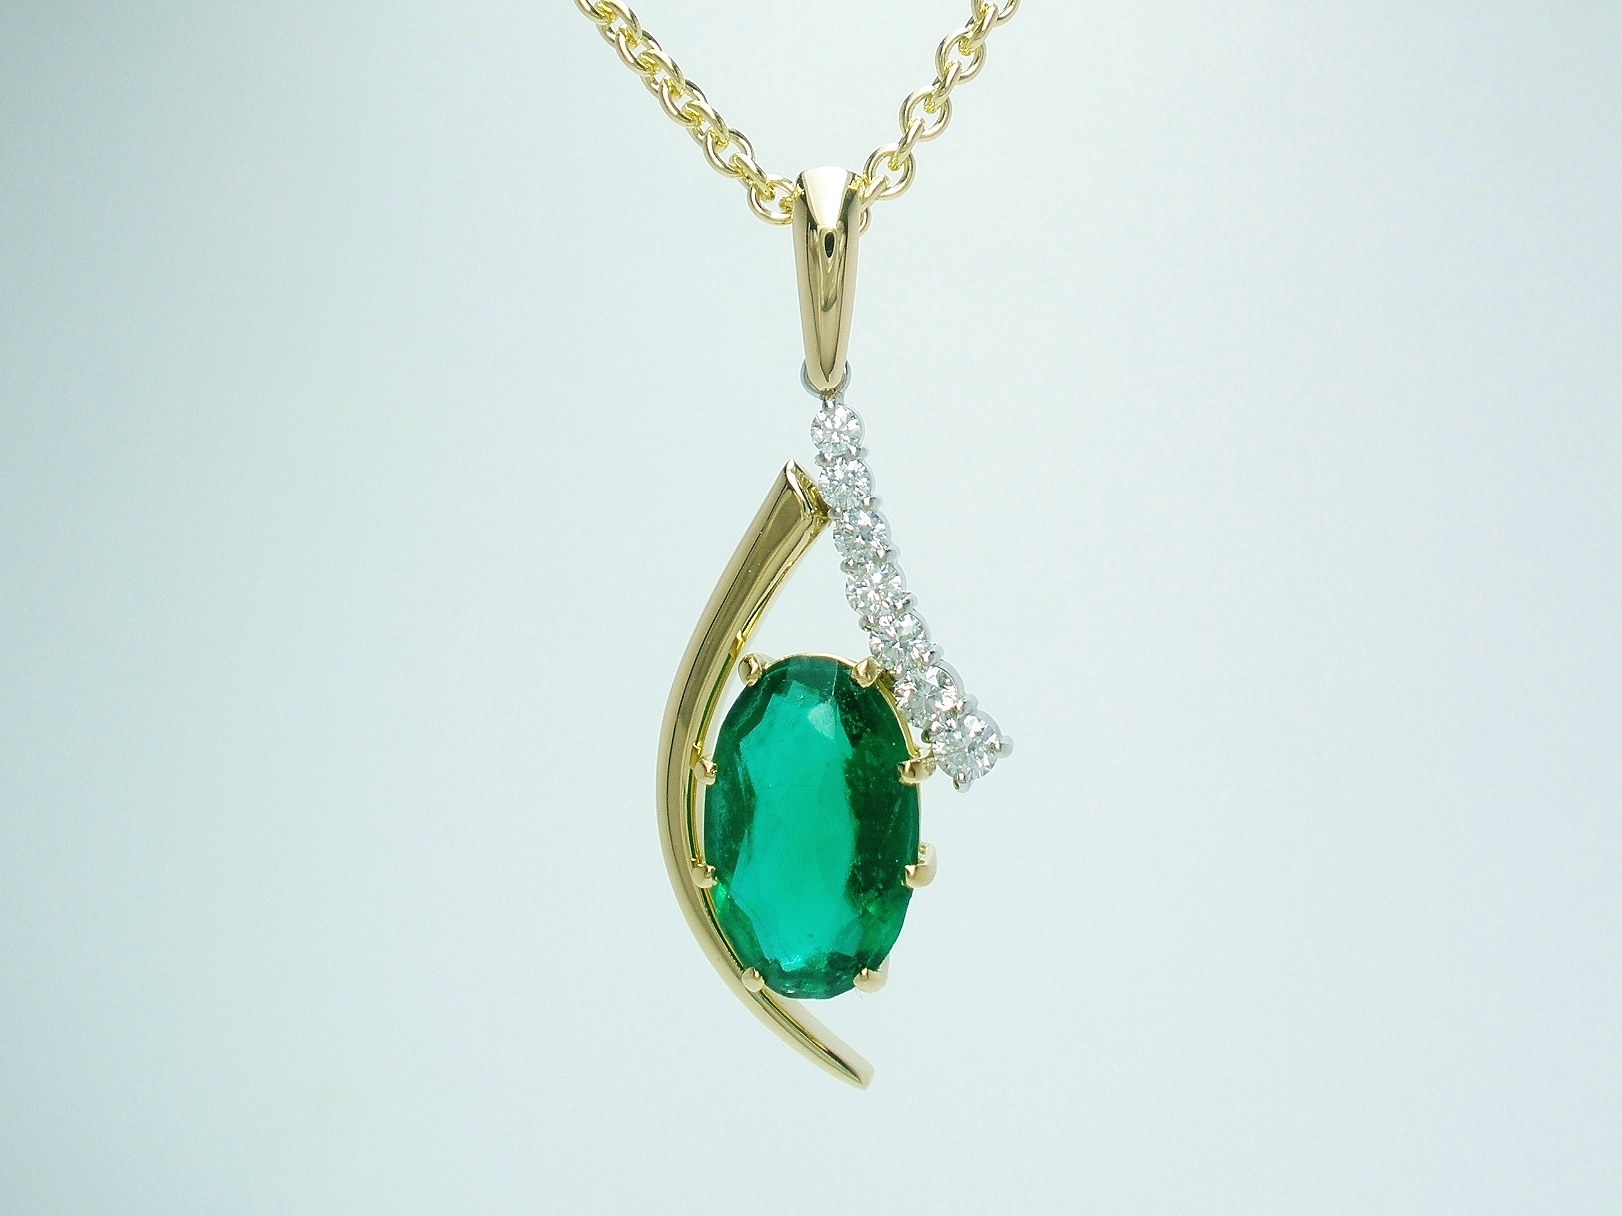 An 8 stone synthetic emerald and round brilliant cut diamond pendant mounted in 18ct yellow gold and platinum. The emerald was supplied by the client & sentimental to them.